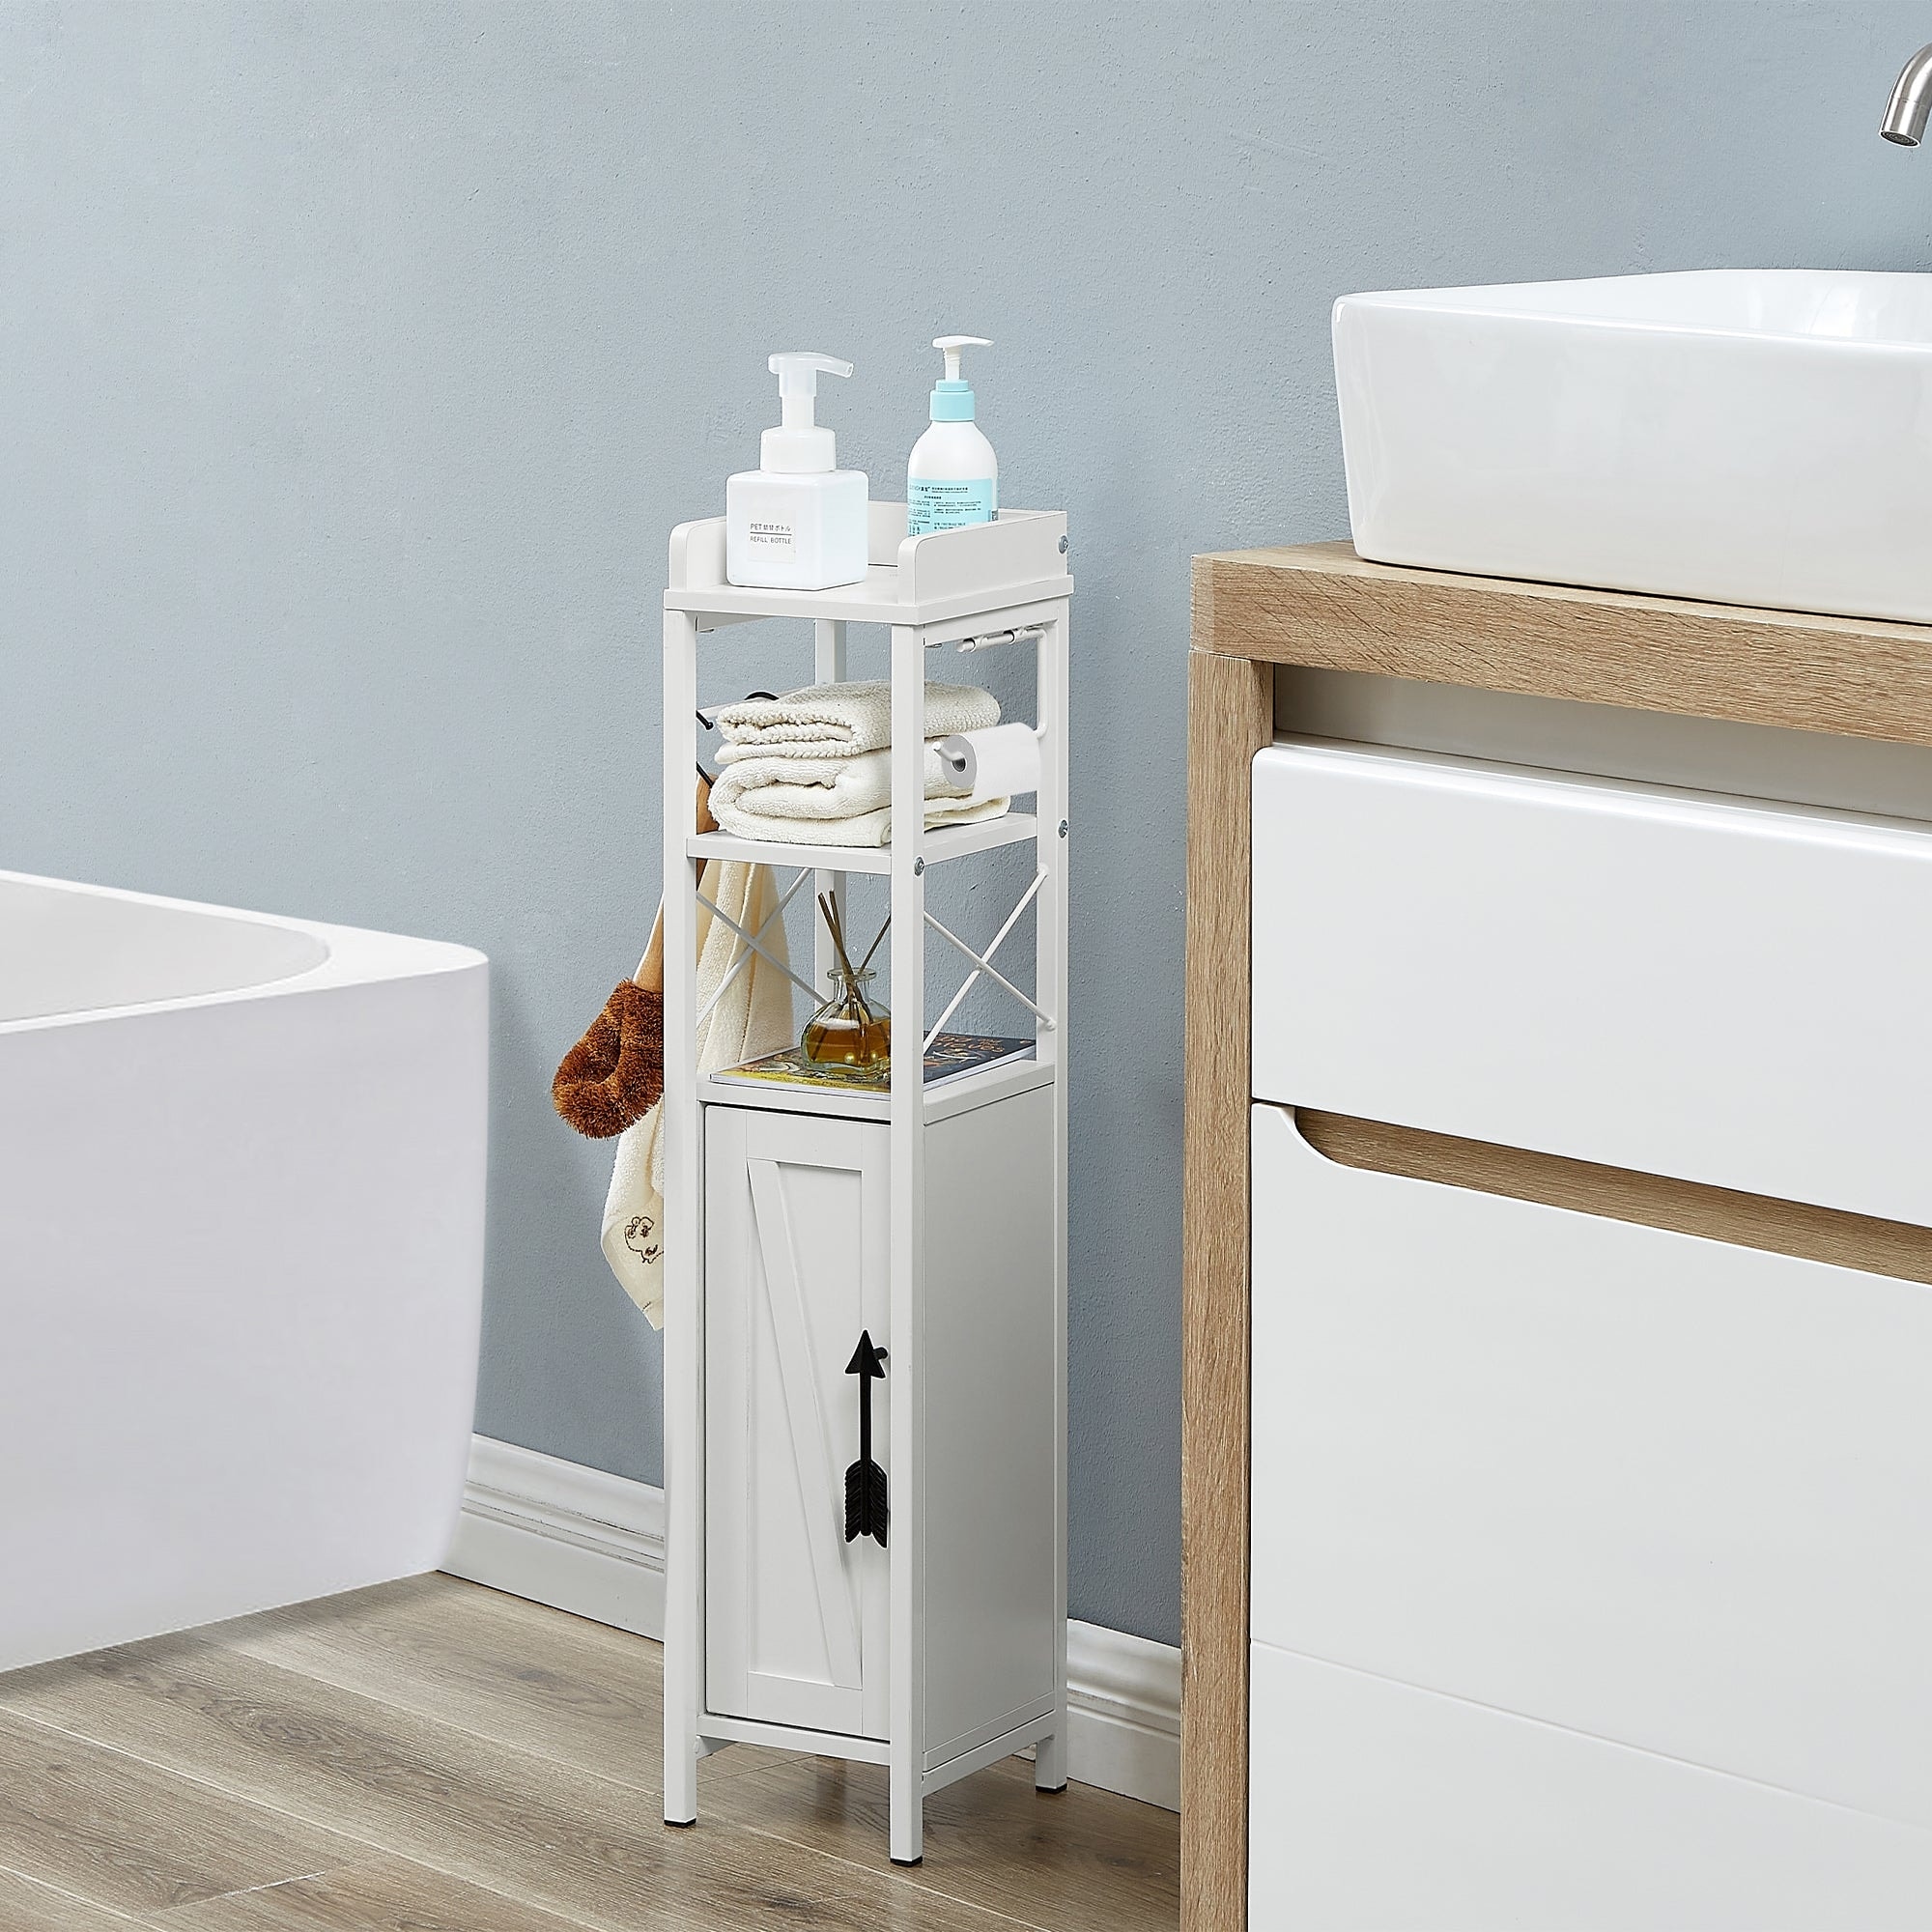 https://ak1.ostkcdn.com/images/products/is/images/direct/cce6d38323d3ab8fdd8d7ce968b2edaf56c7fa38/VECELO%2C-3-Tier-Bathroom-Cabinet-Shelves-Wooden-with-3-hooks%2CBathroom-Storage-with-door%2C-Brown.jpg